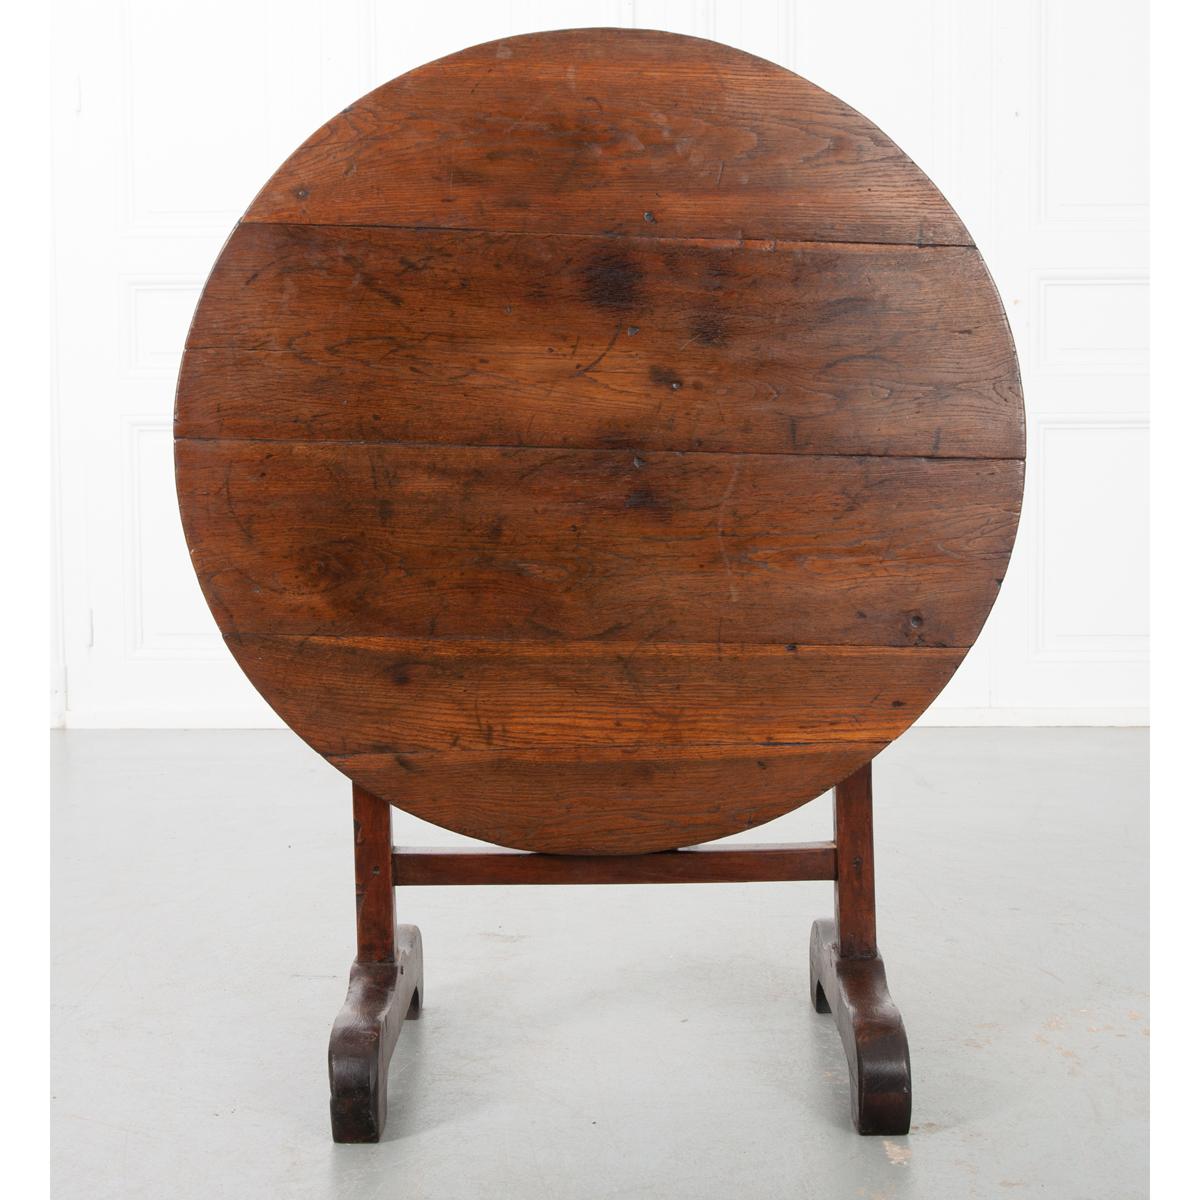 This wine tasting – or vendange – table was made in the 19th century in France. Used by wine-makers throughout France and Europe, these specialized tables feature the ability to be stored away when not in use thanks to the tilting mechanism that